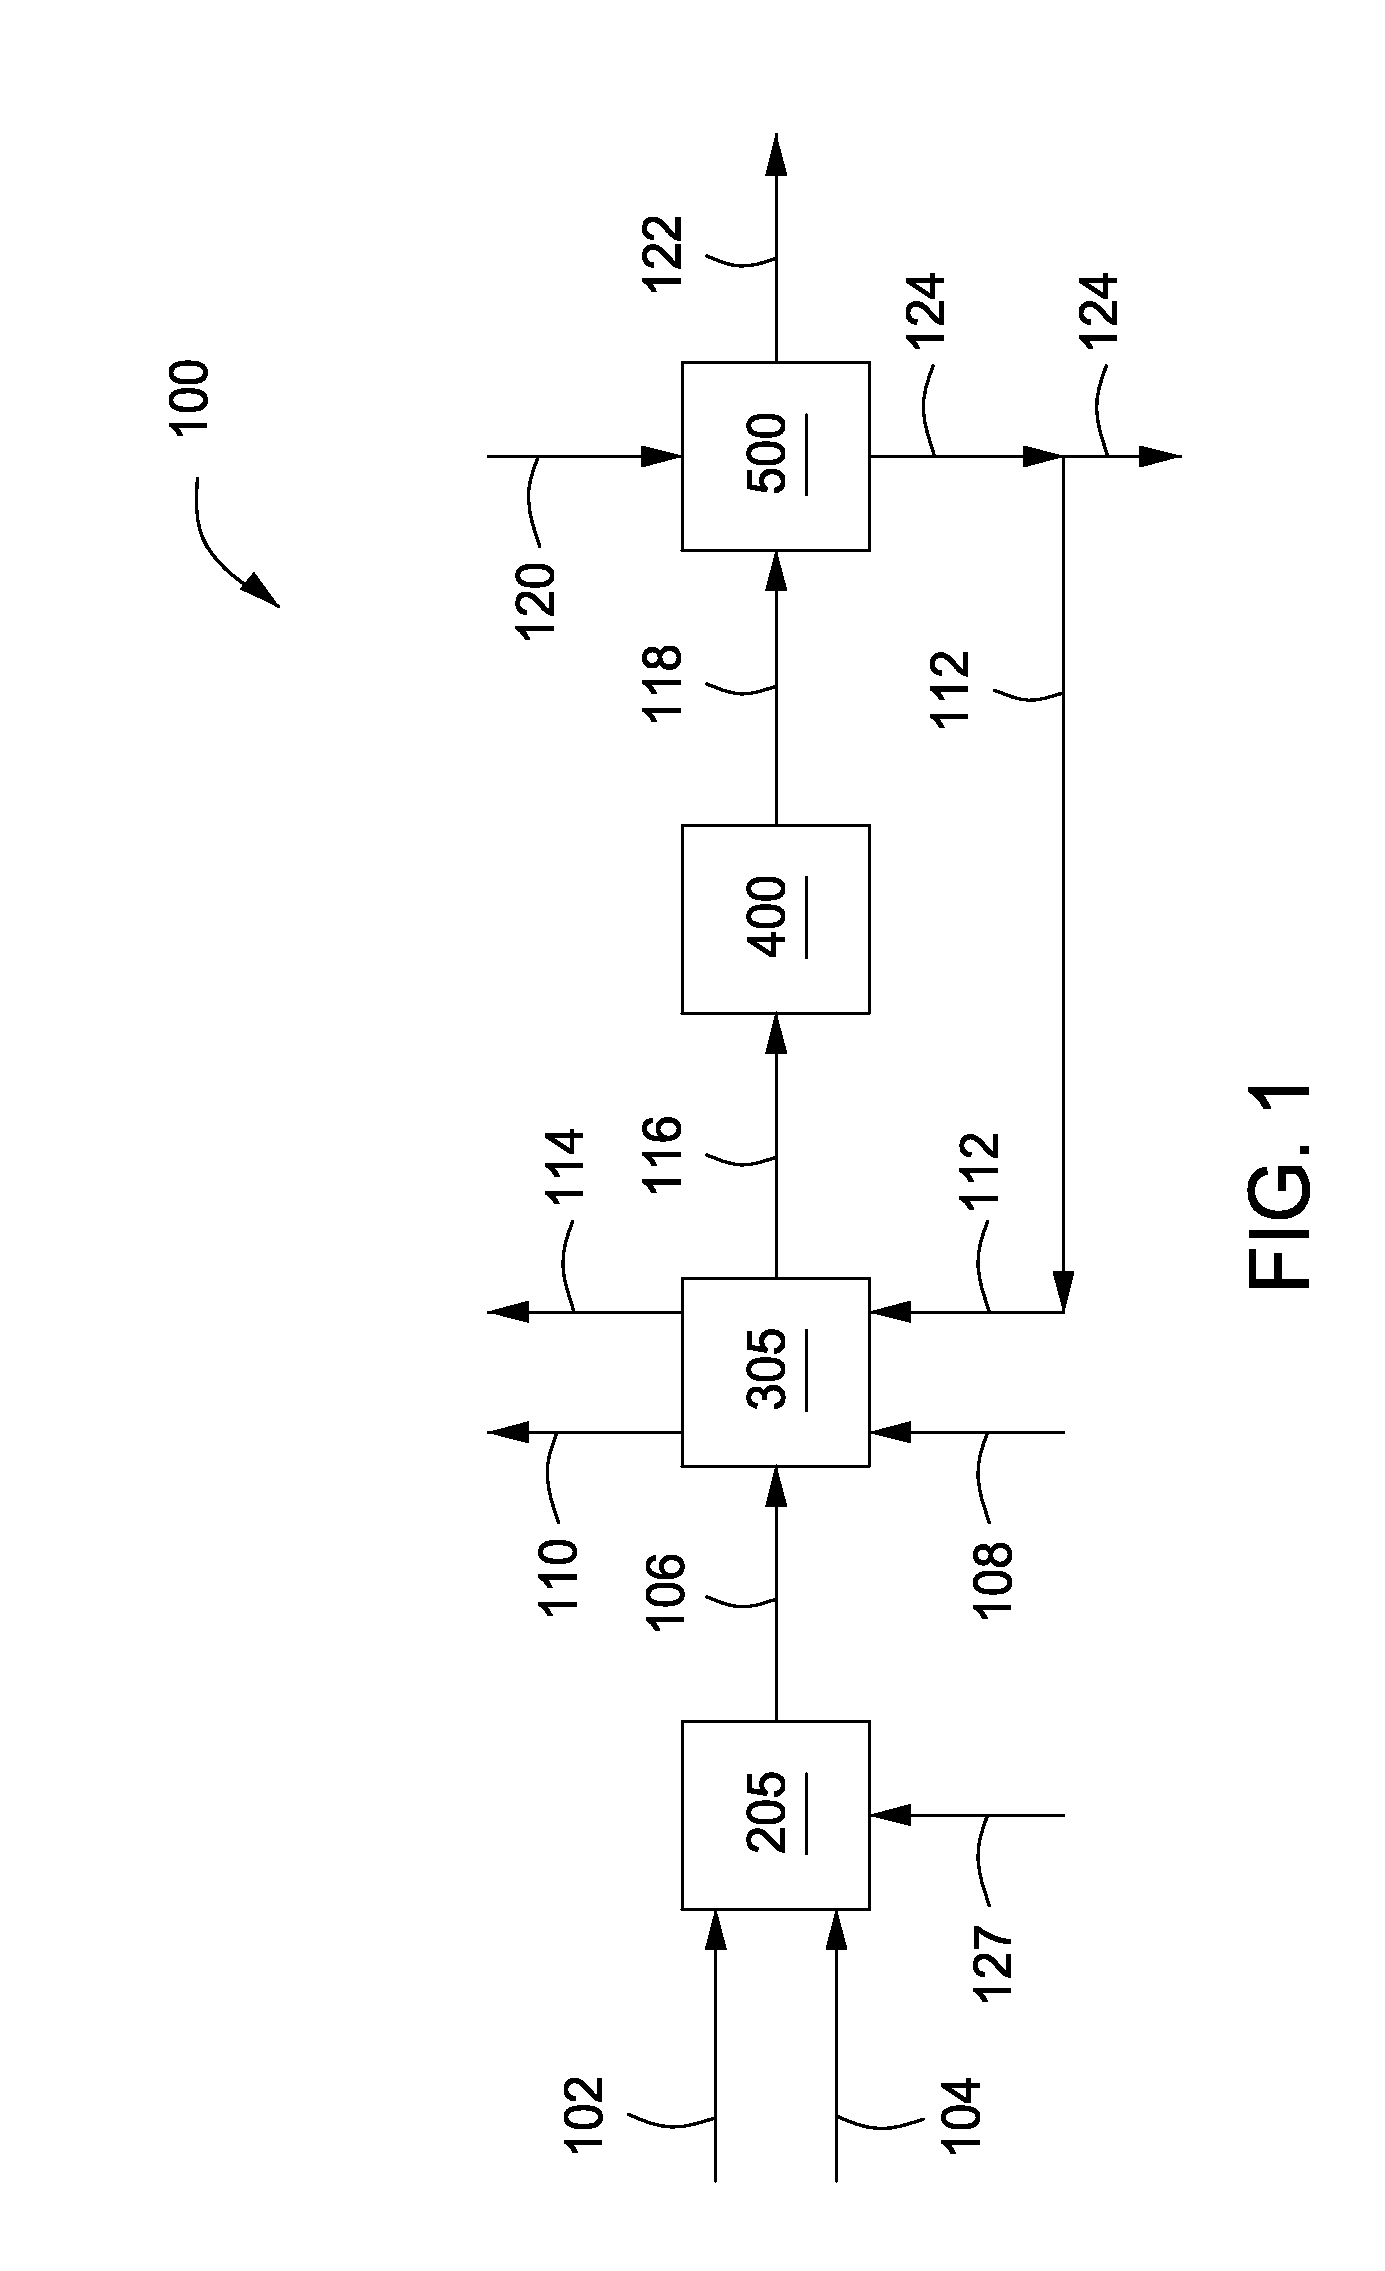 Systems and methods for producing substitute natural gas